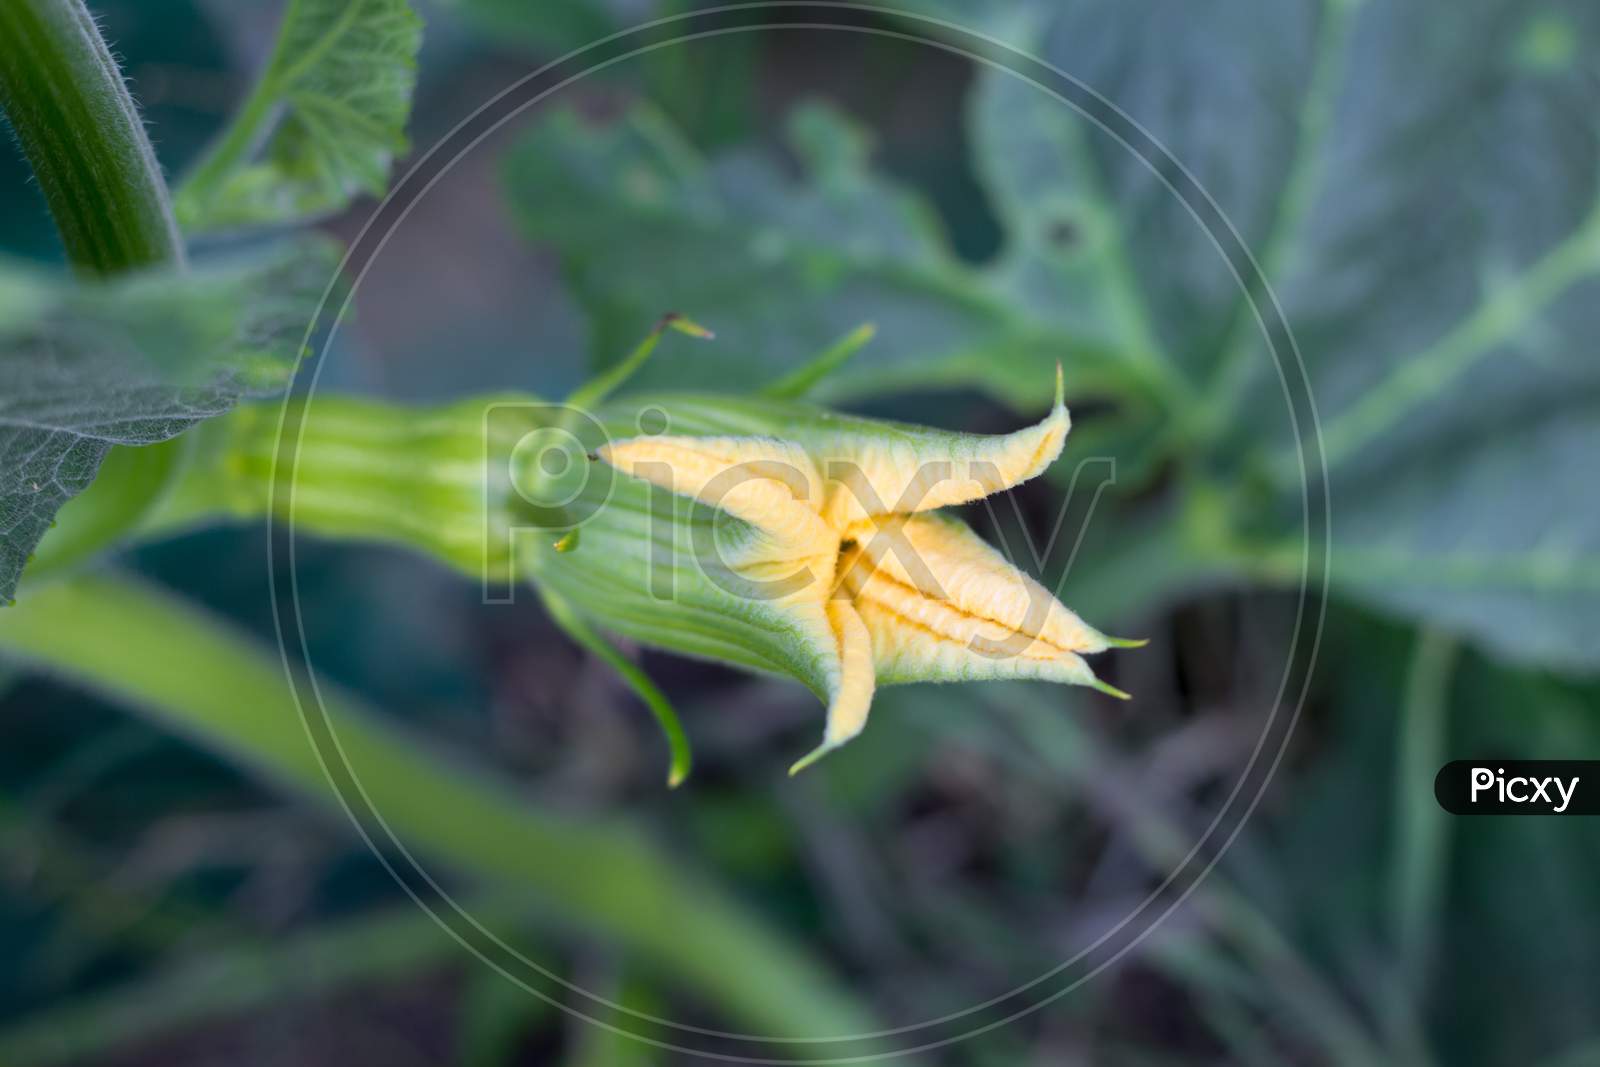 Female Yellow Flower Of The Pumpkin Opening With The Fruit